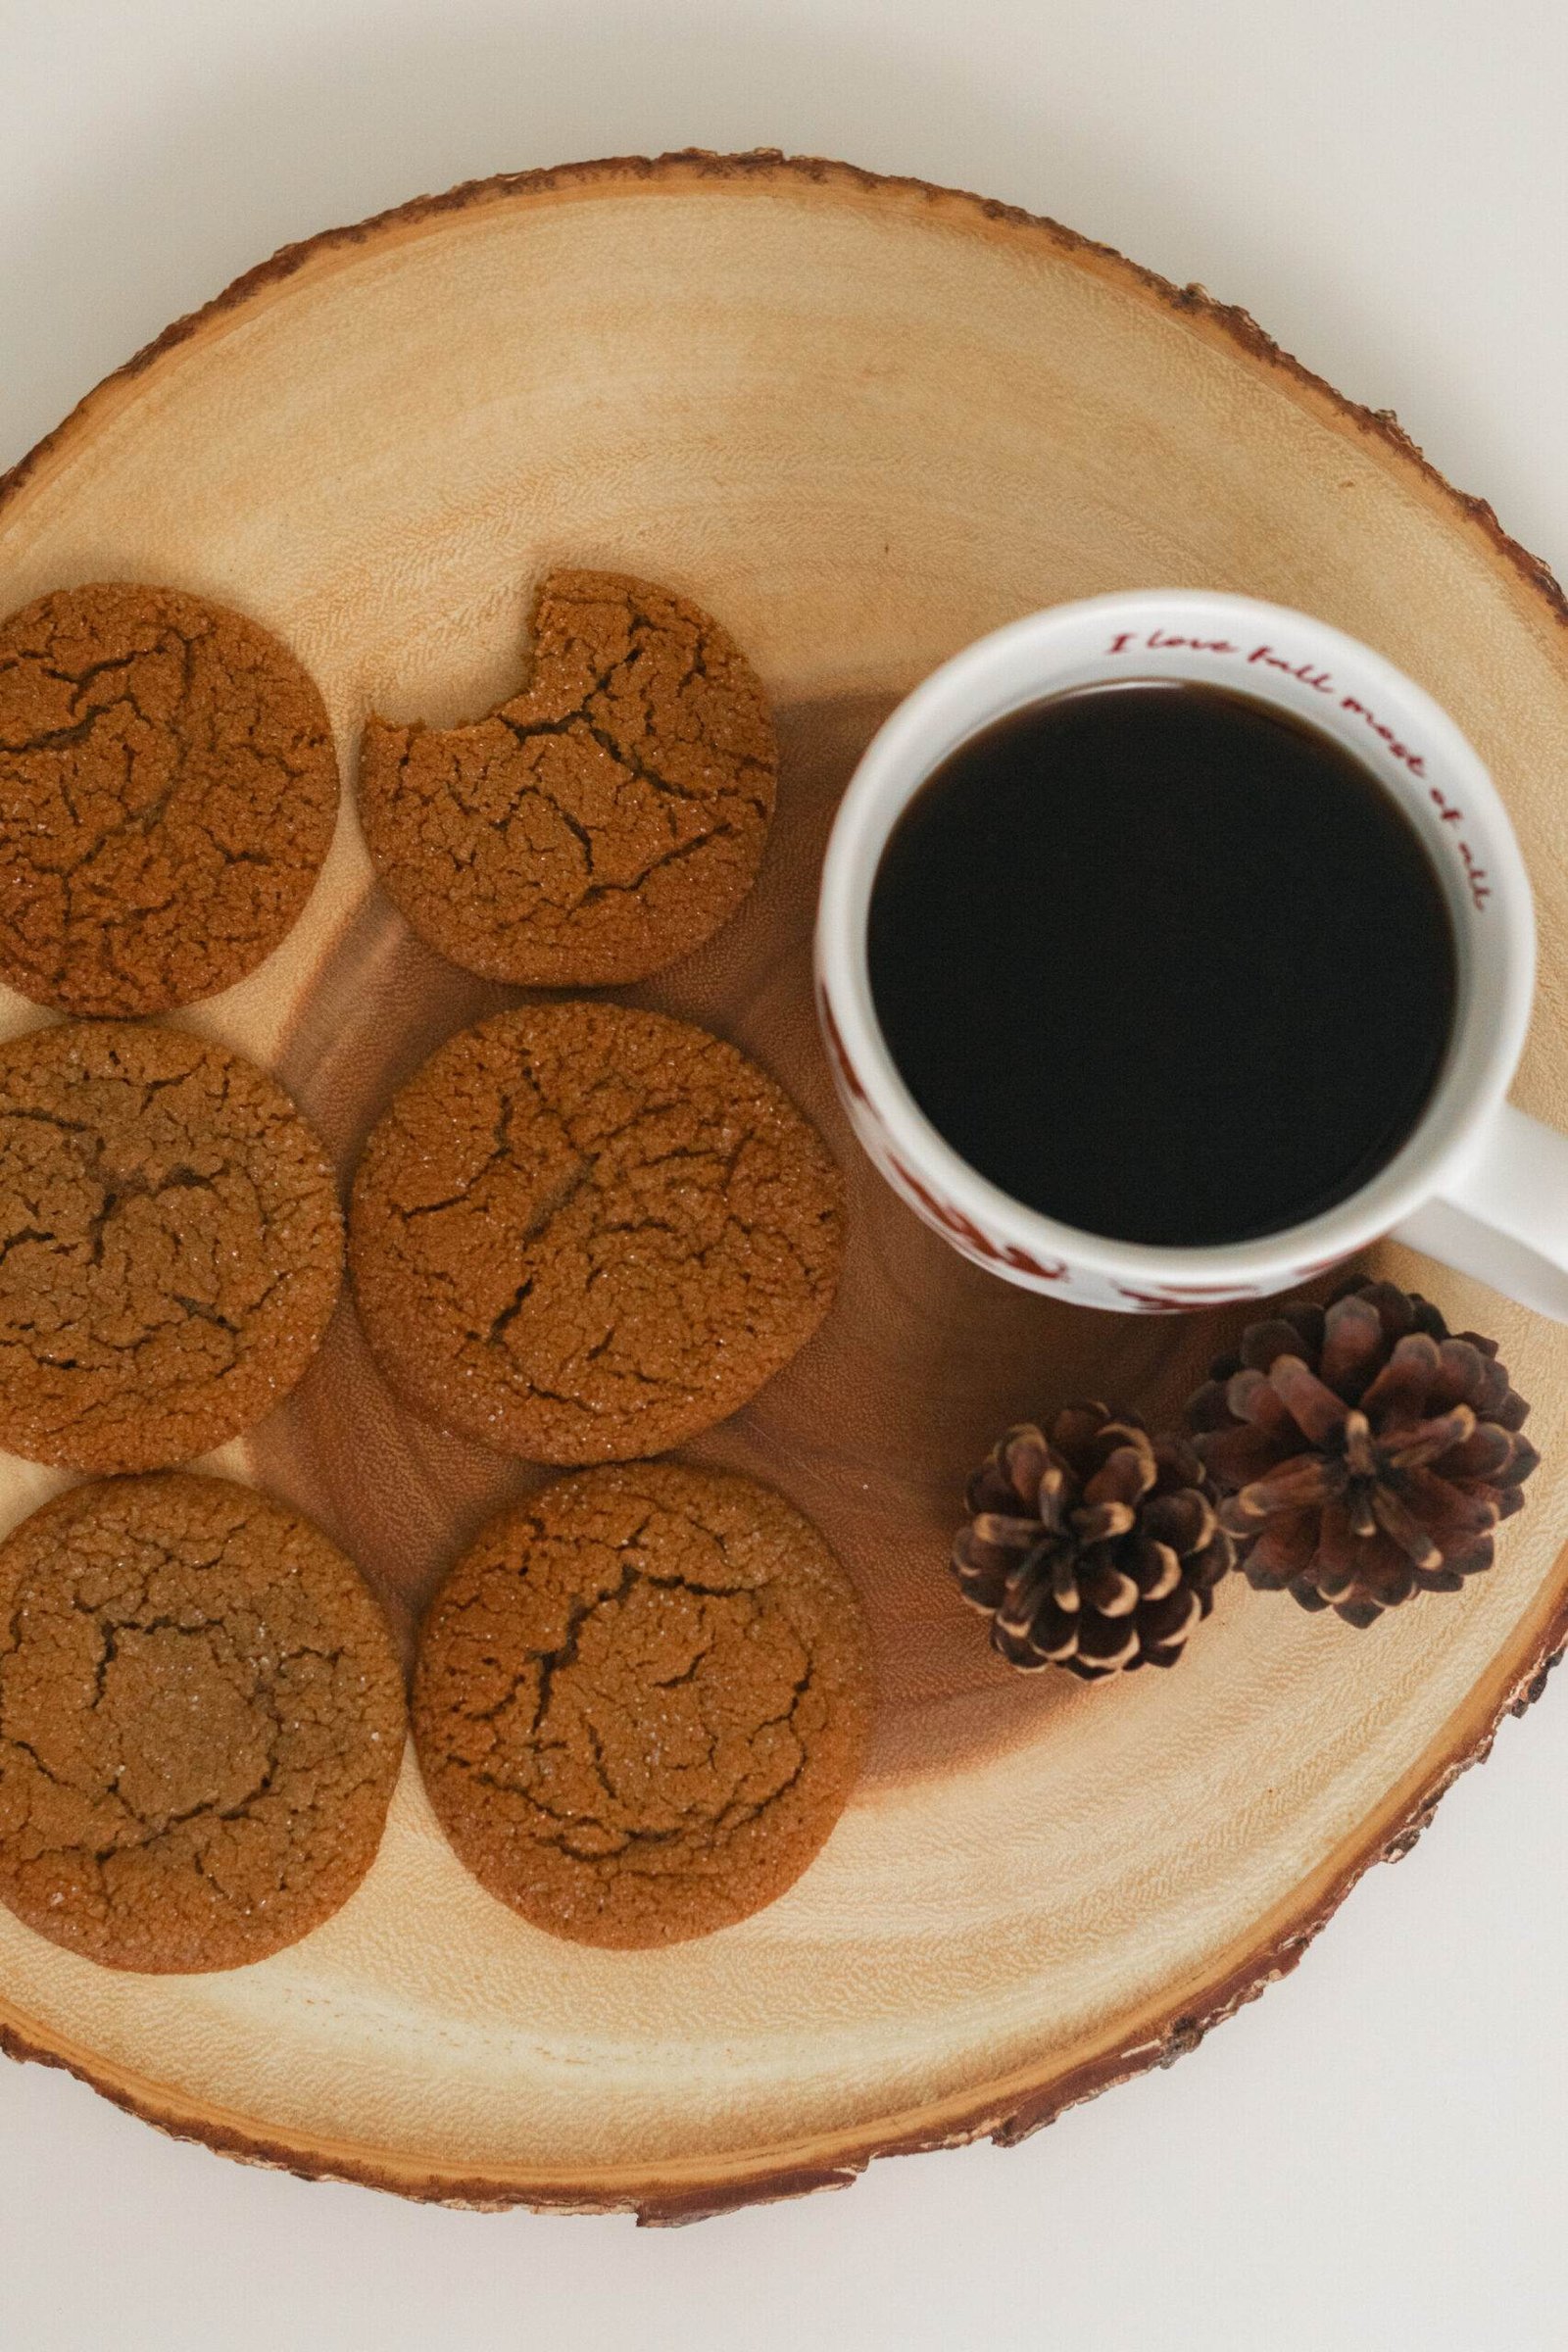 six crinkled molasses cookies next to a mug of black coffee